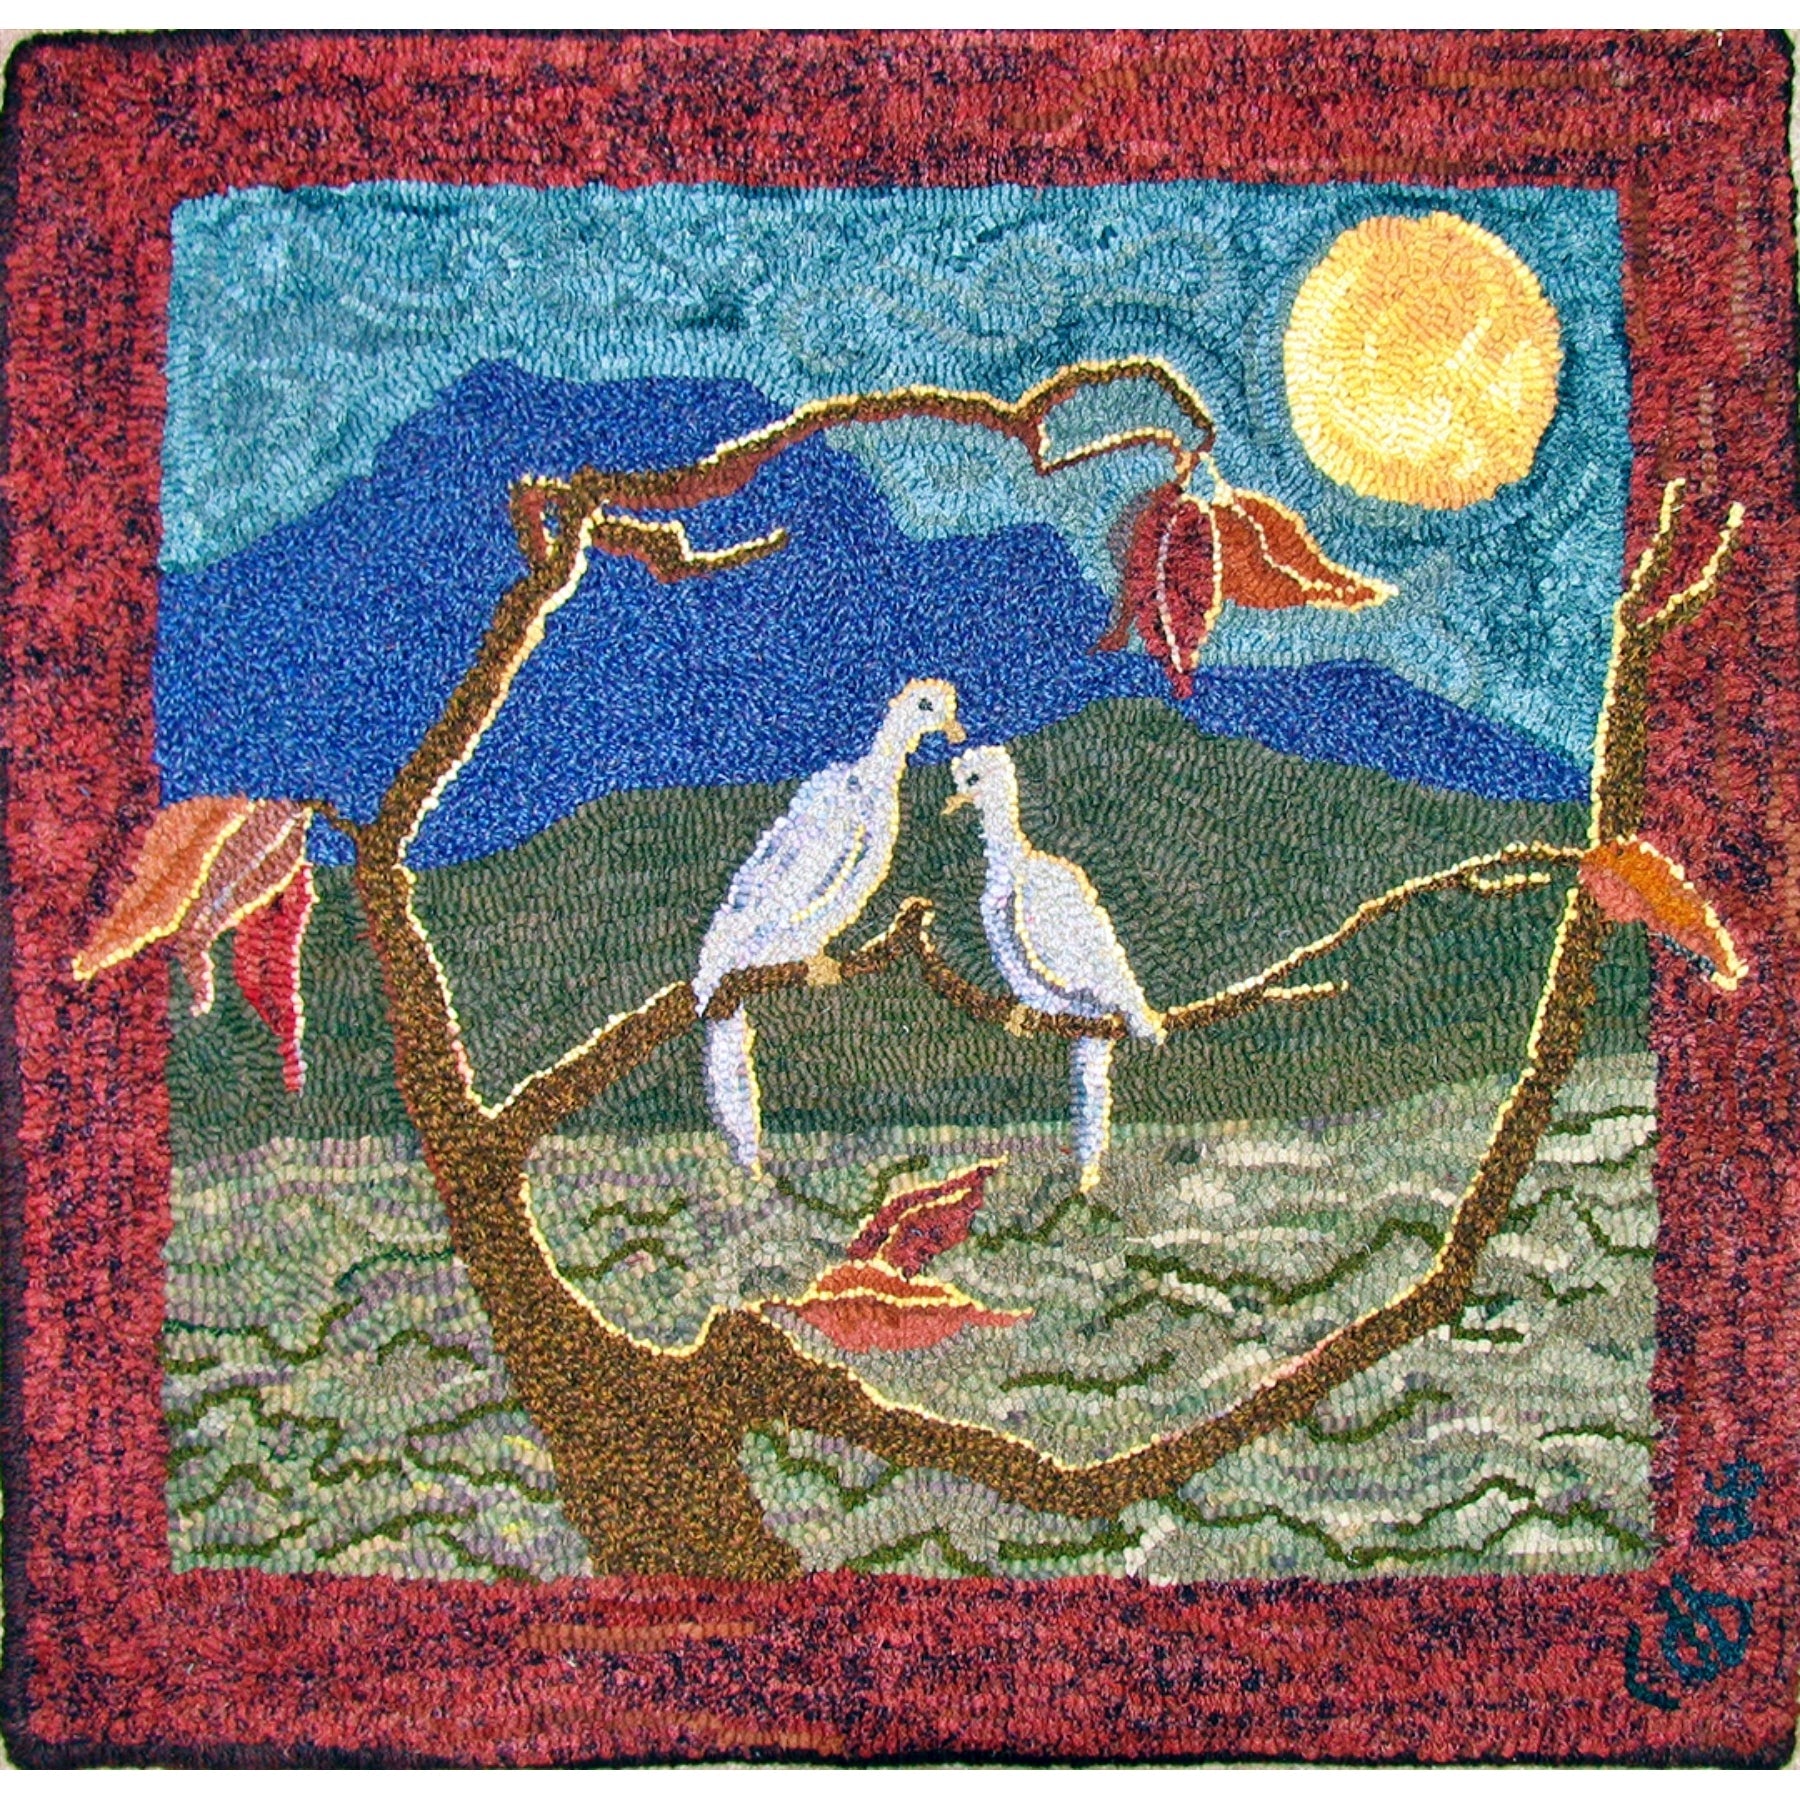 Moonlit Doves, rug hooked by Cheryl Bollenbach